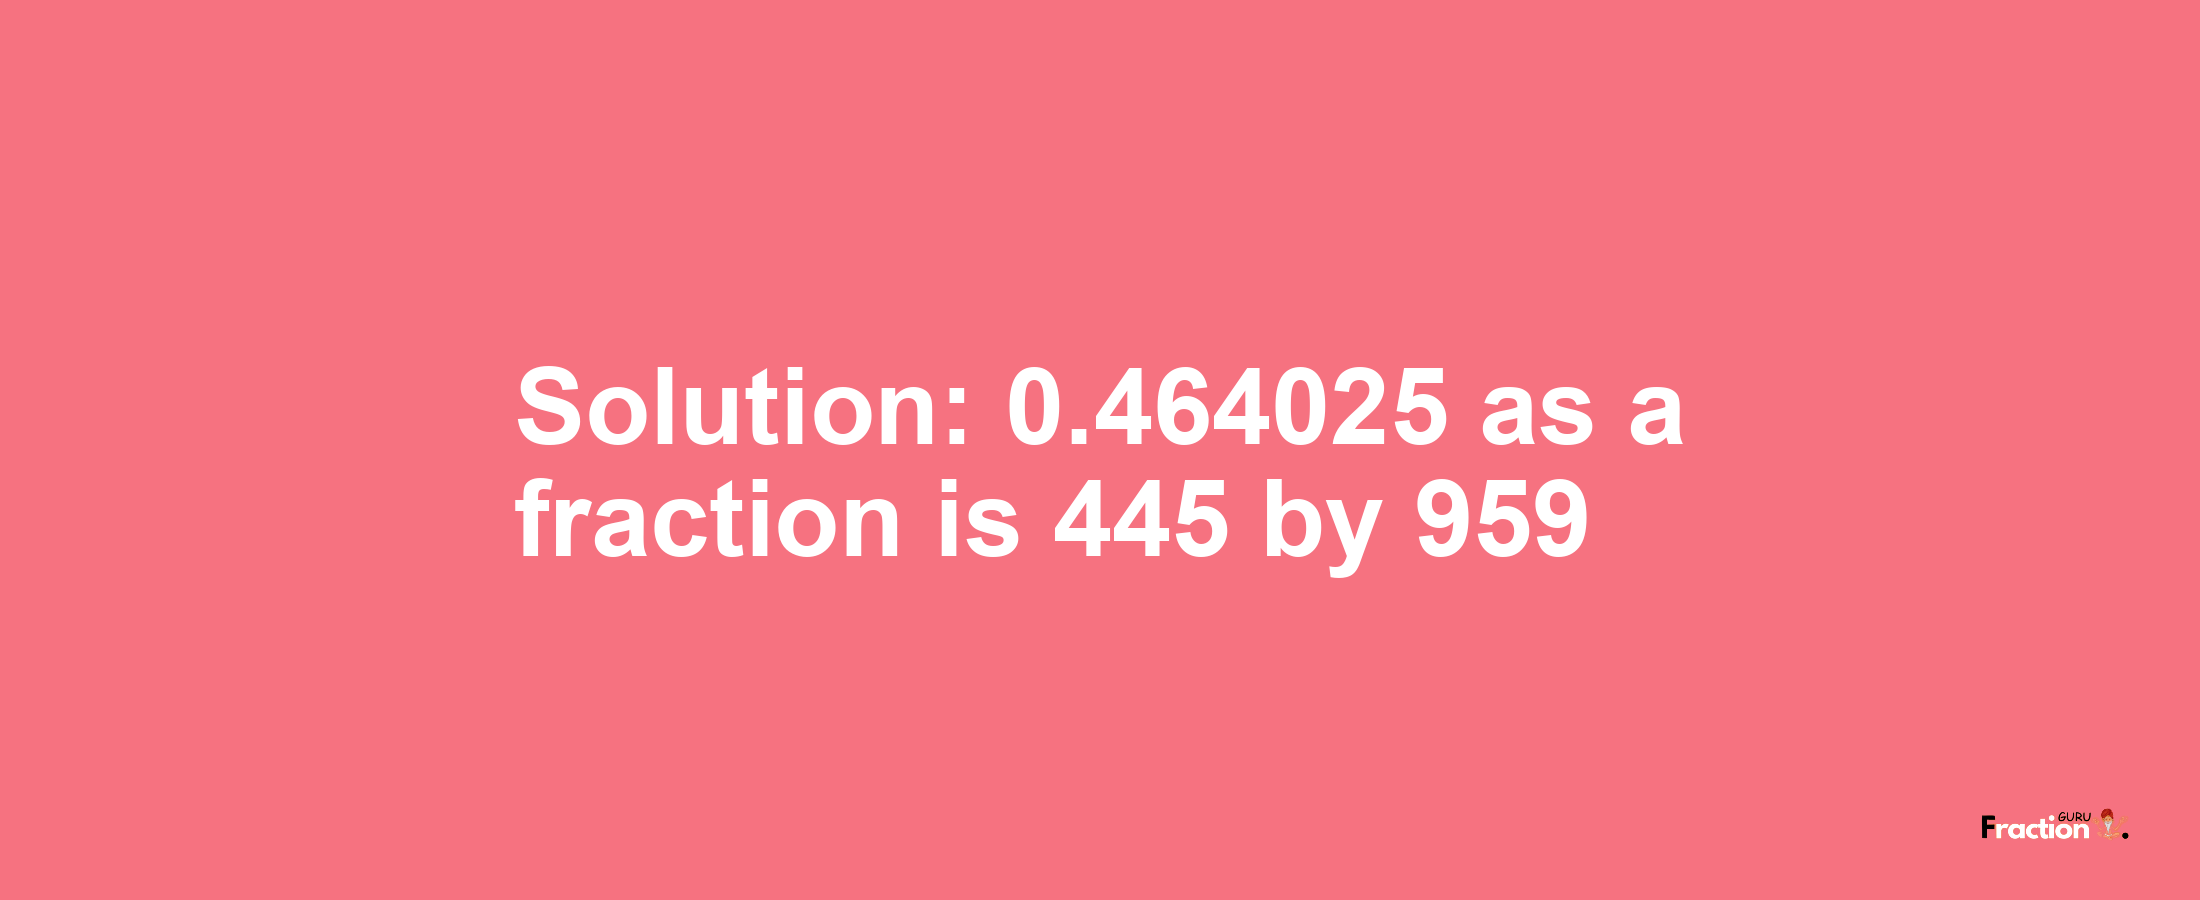 Solution:0.464025 as a fraction is 445/959